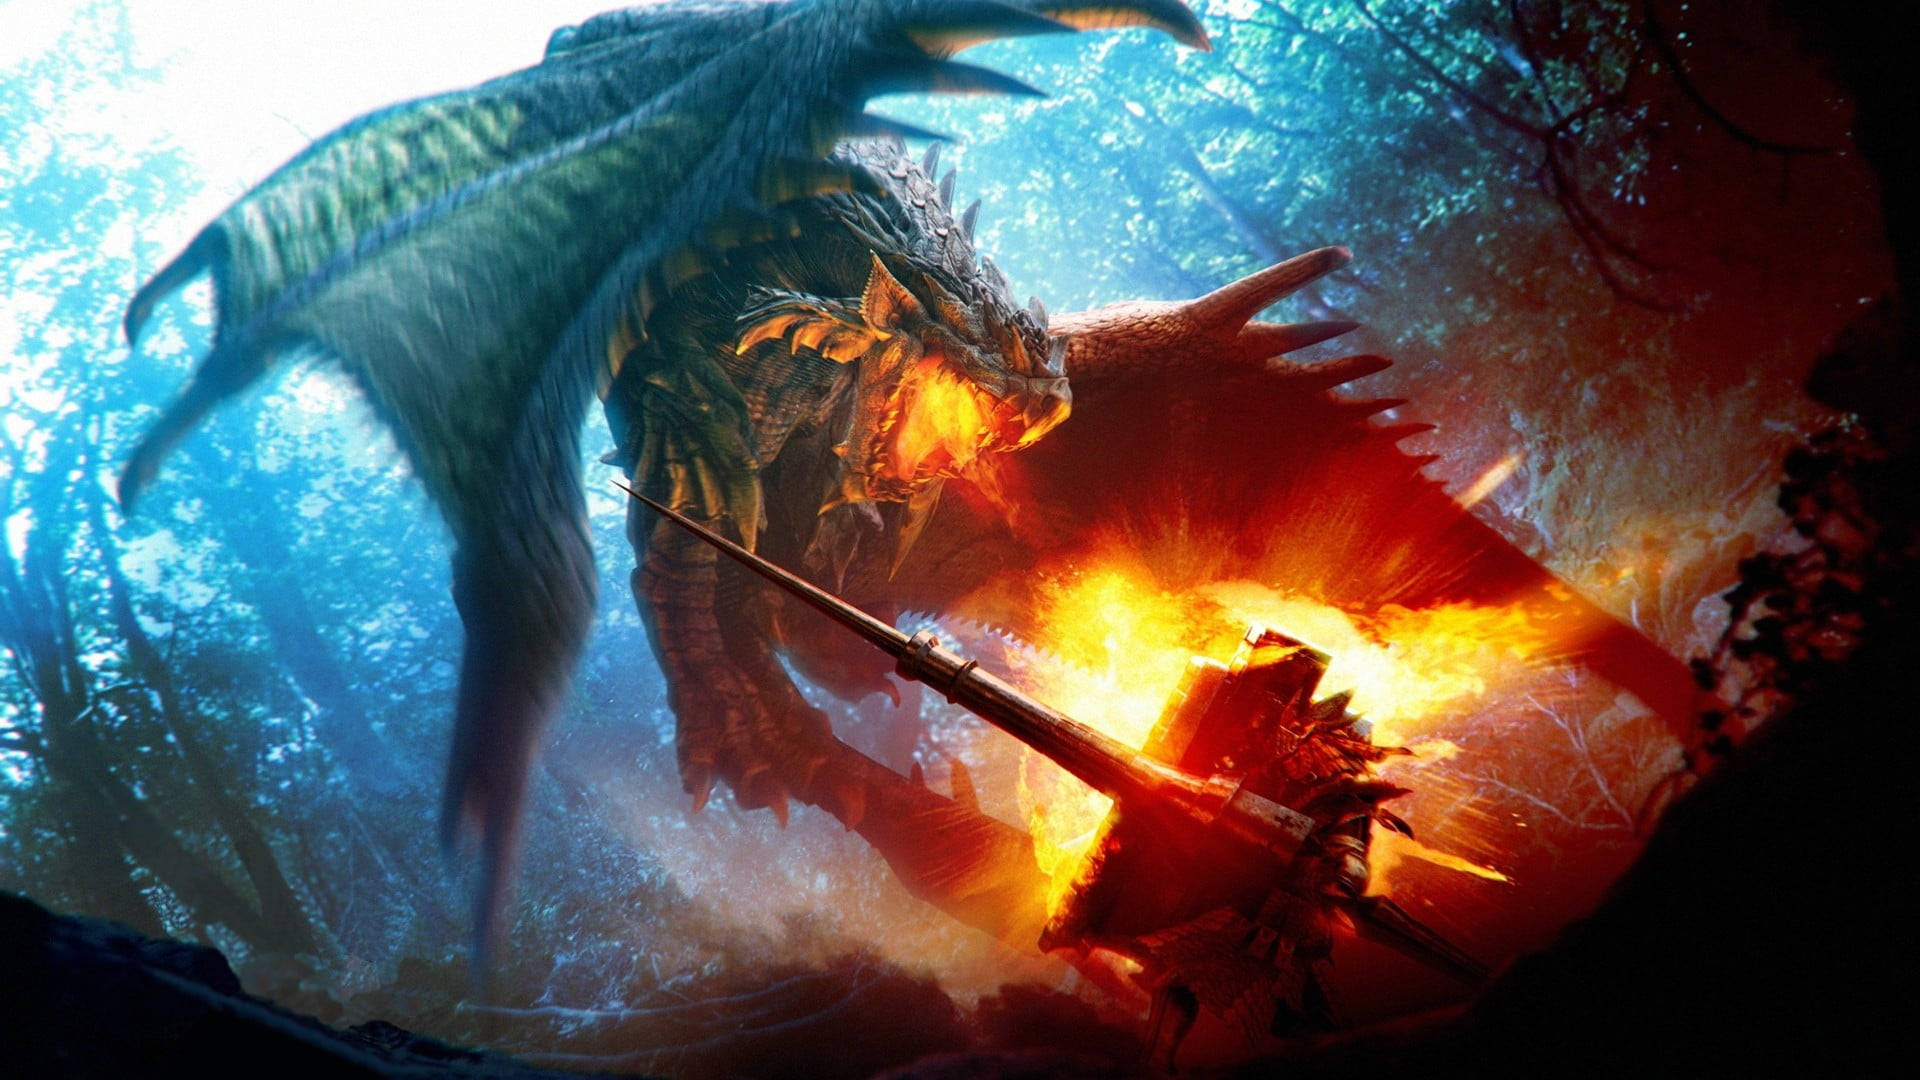 Cool off this summer with Monster Hunter World: Iceborne Wallpaper